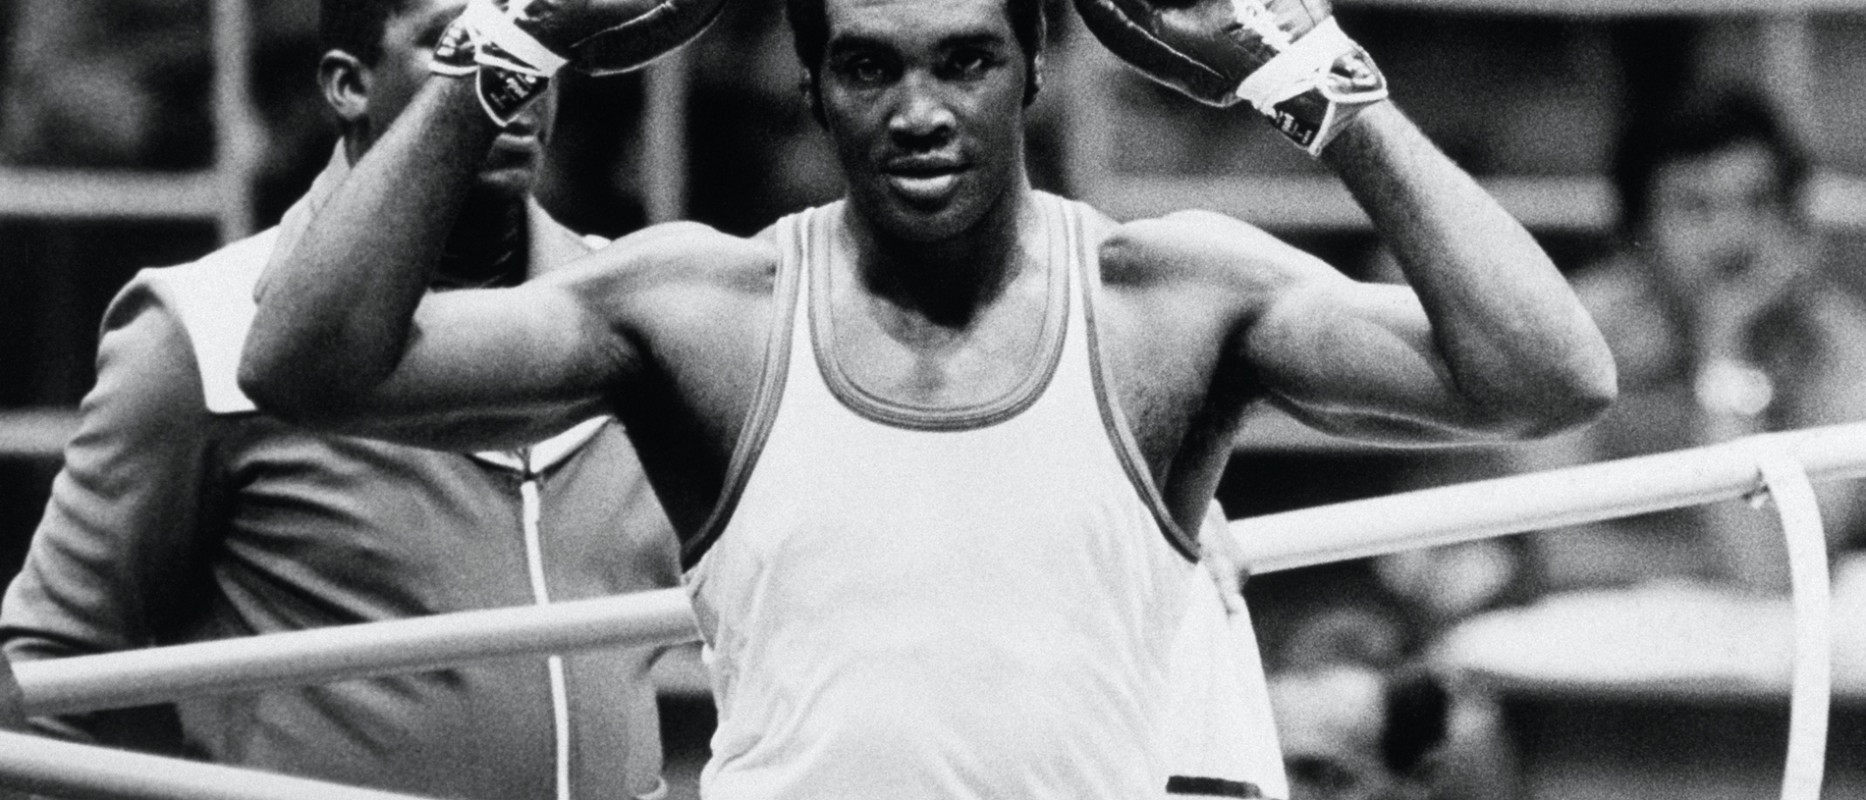 This will be the second time Belgrade has staged the AIBA Men's World Boxing Championships following 1978, where the winners included Cuba's legendary Teófilo Stevenson in the heavyweight division ©Getty Images